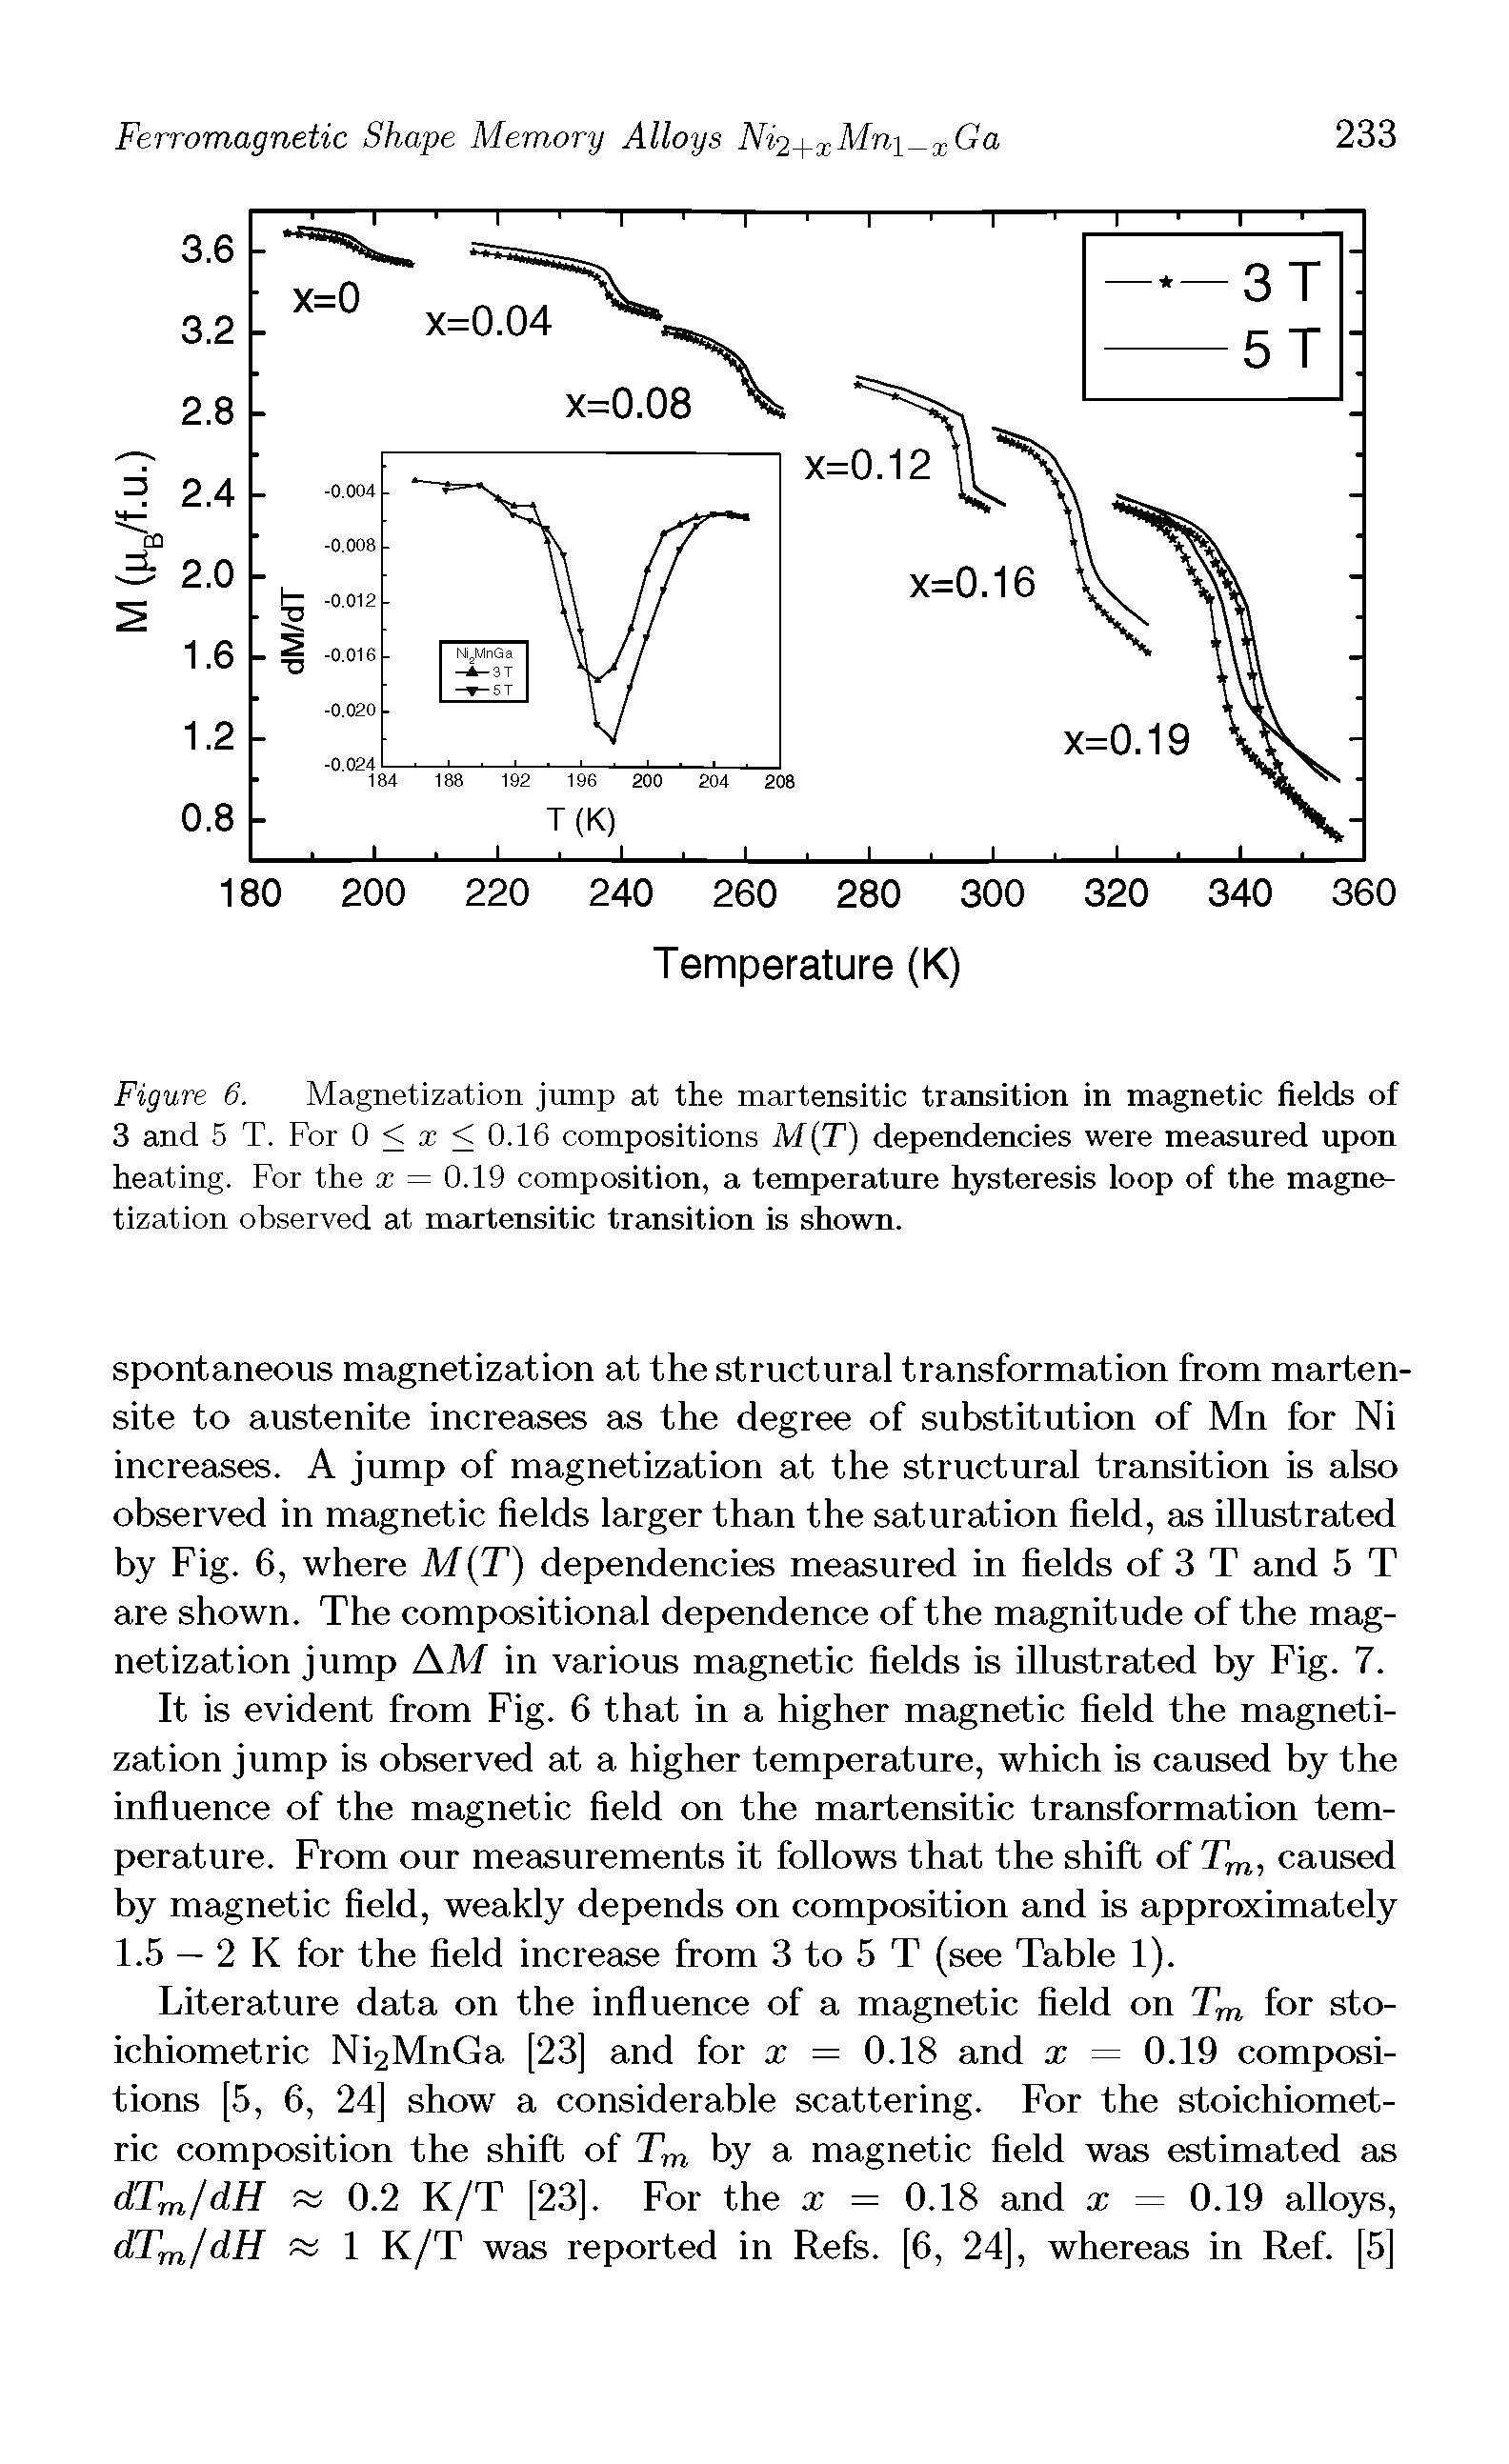 Figure 6. Magnetization jump at the martensitic transition in magnetic fields of 3 and 5 T. For 0 < x < 0.16 compositions M(T) dependencies were measured upon heating. For the x = 0.19 composition, a temperature hysteresis loop of the magnetization observed at martensitic transition is shown.